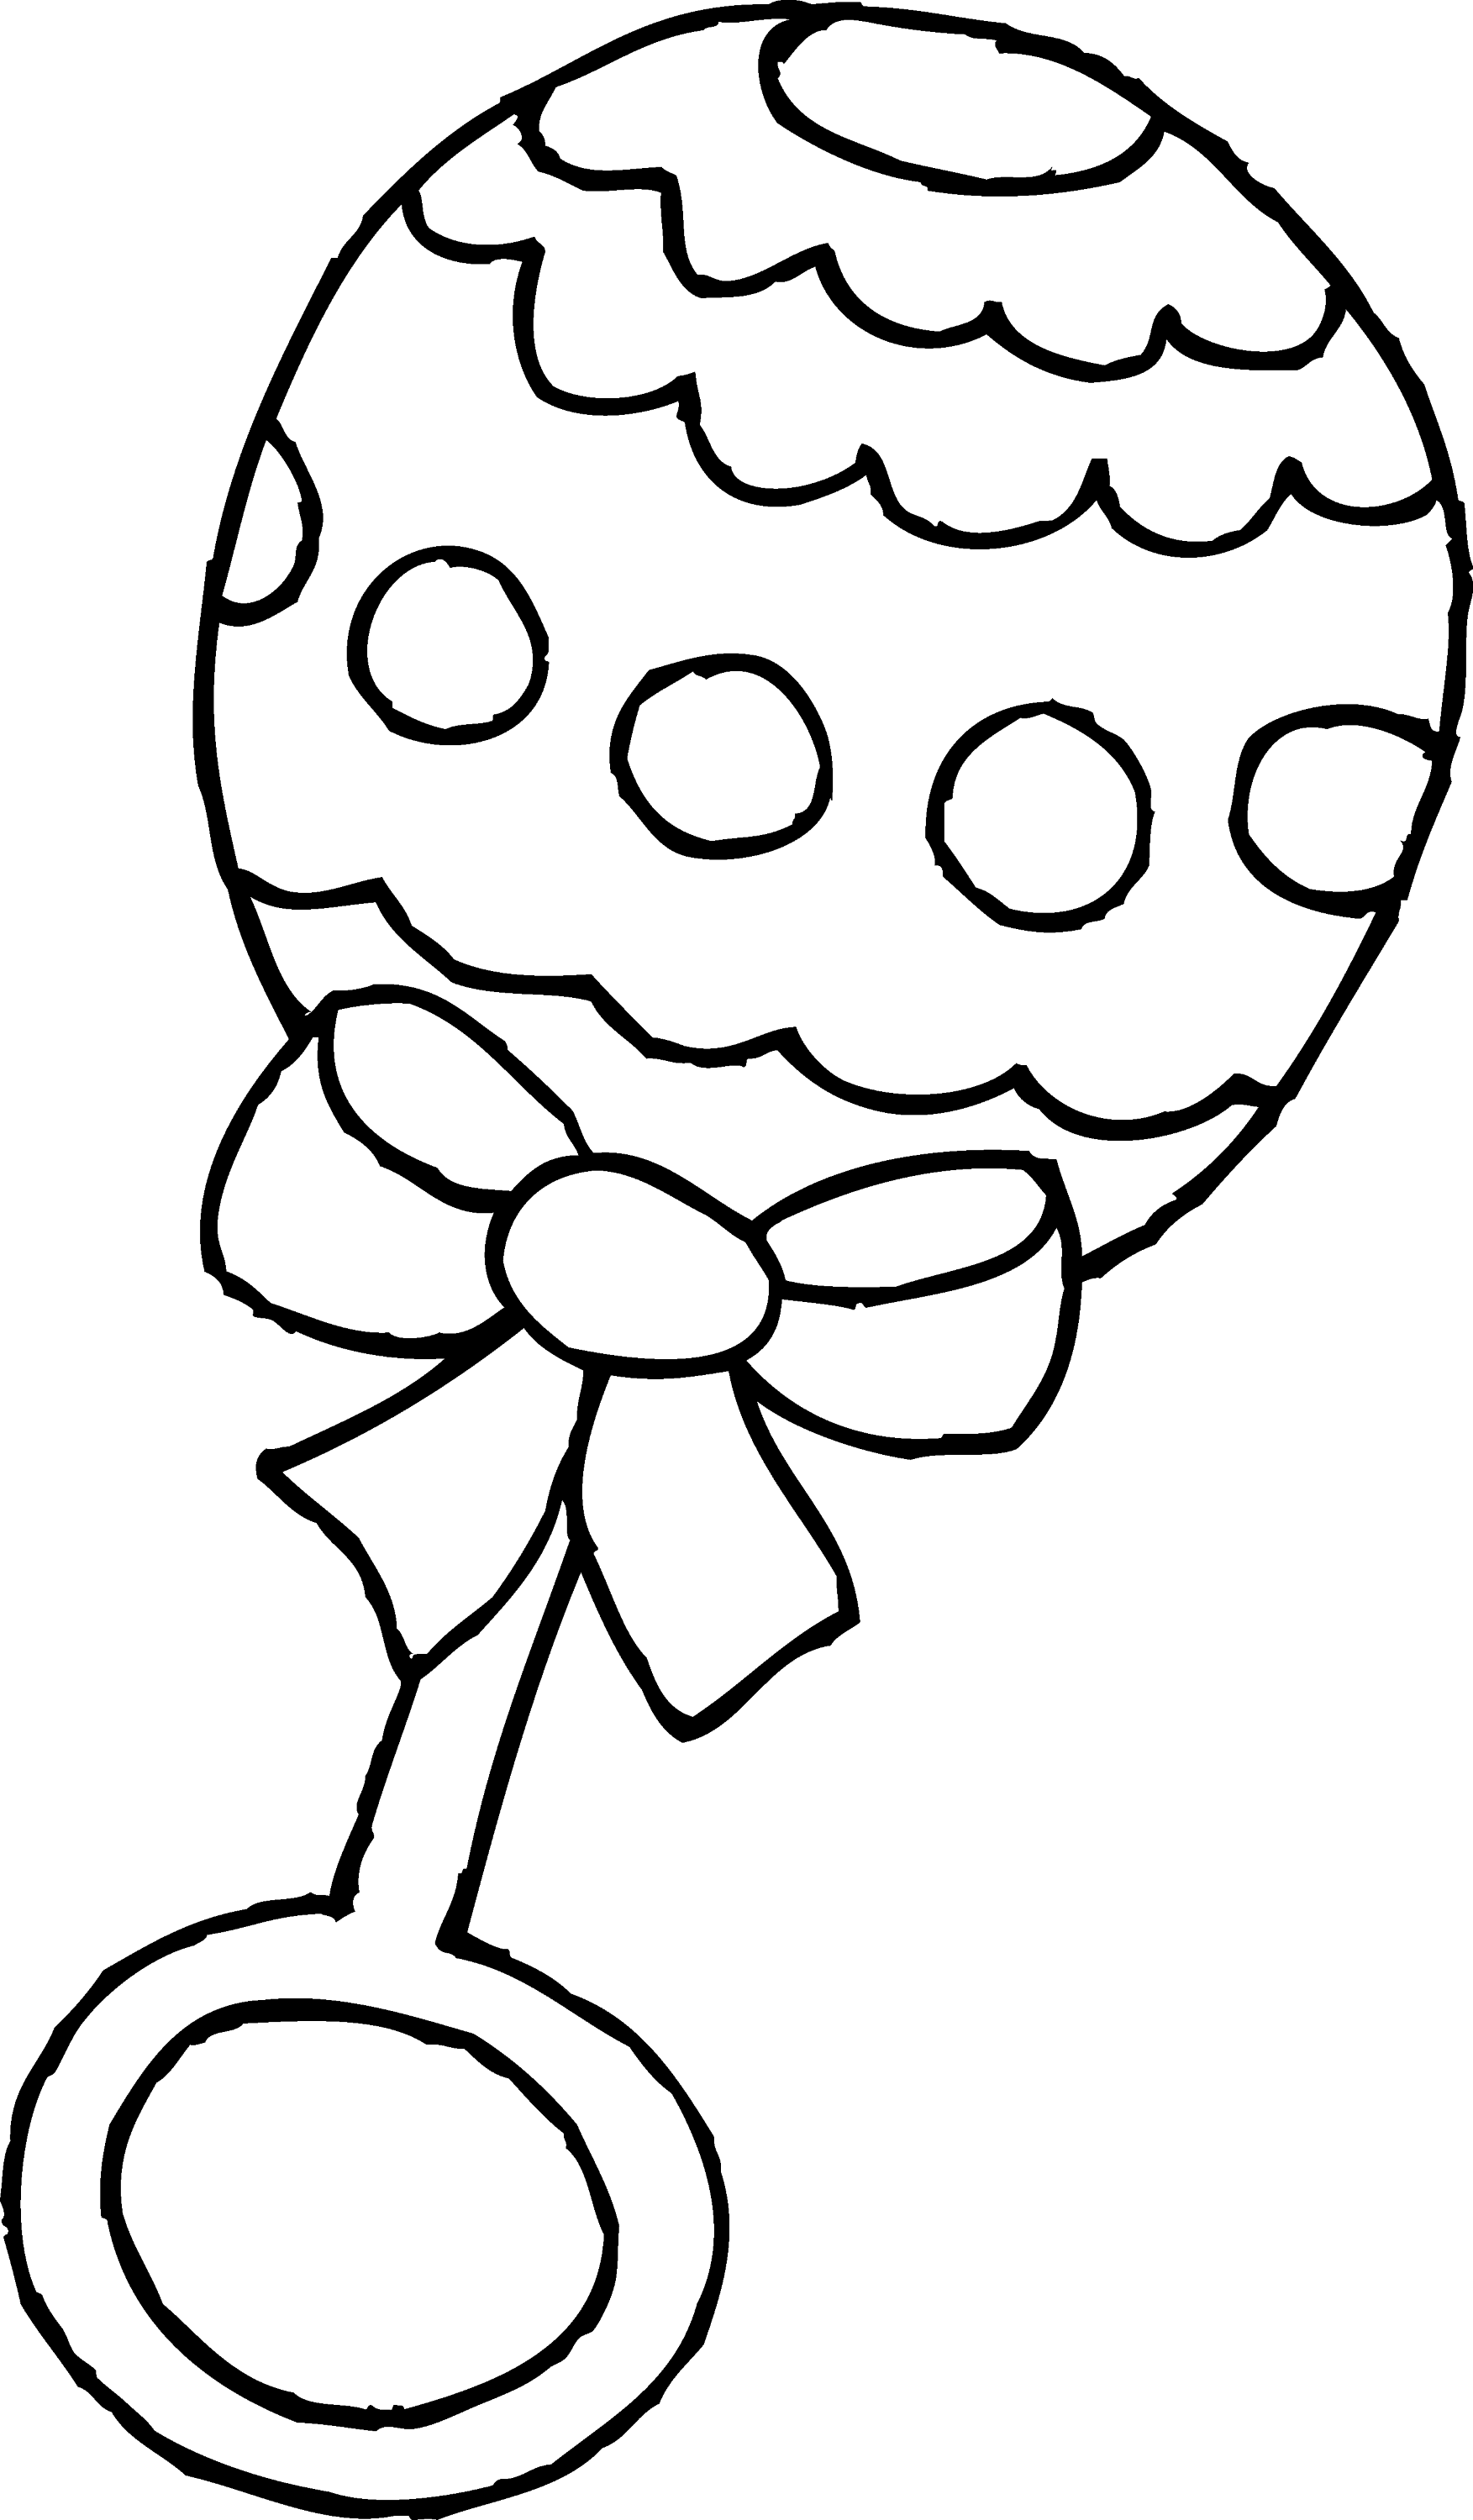 baby rattle clipart black and white - photo #2